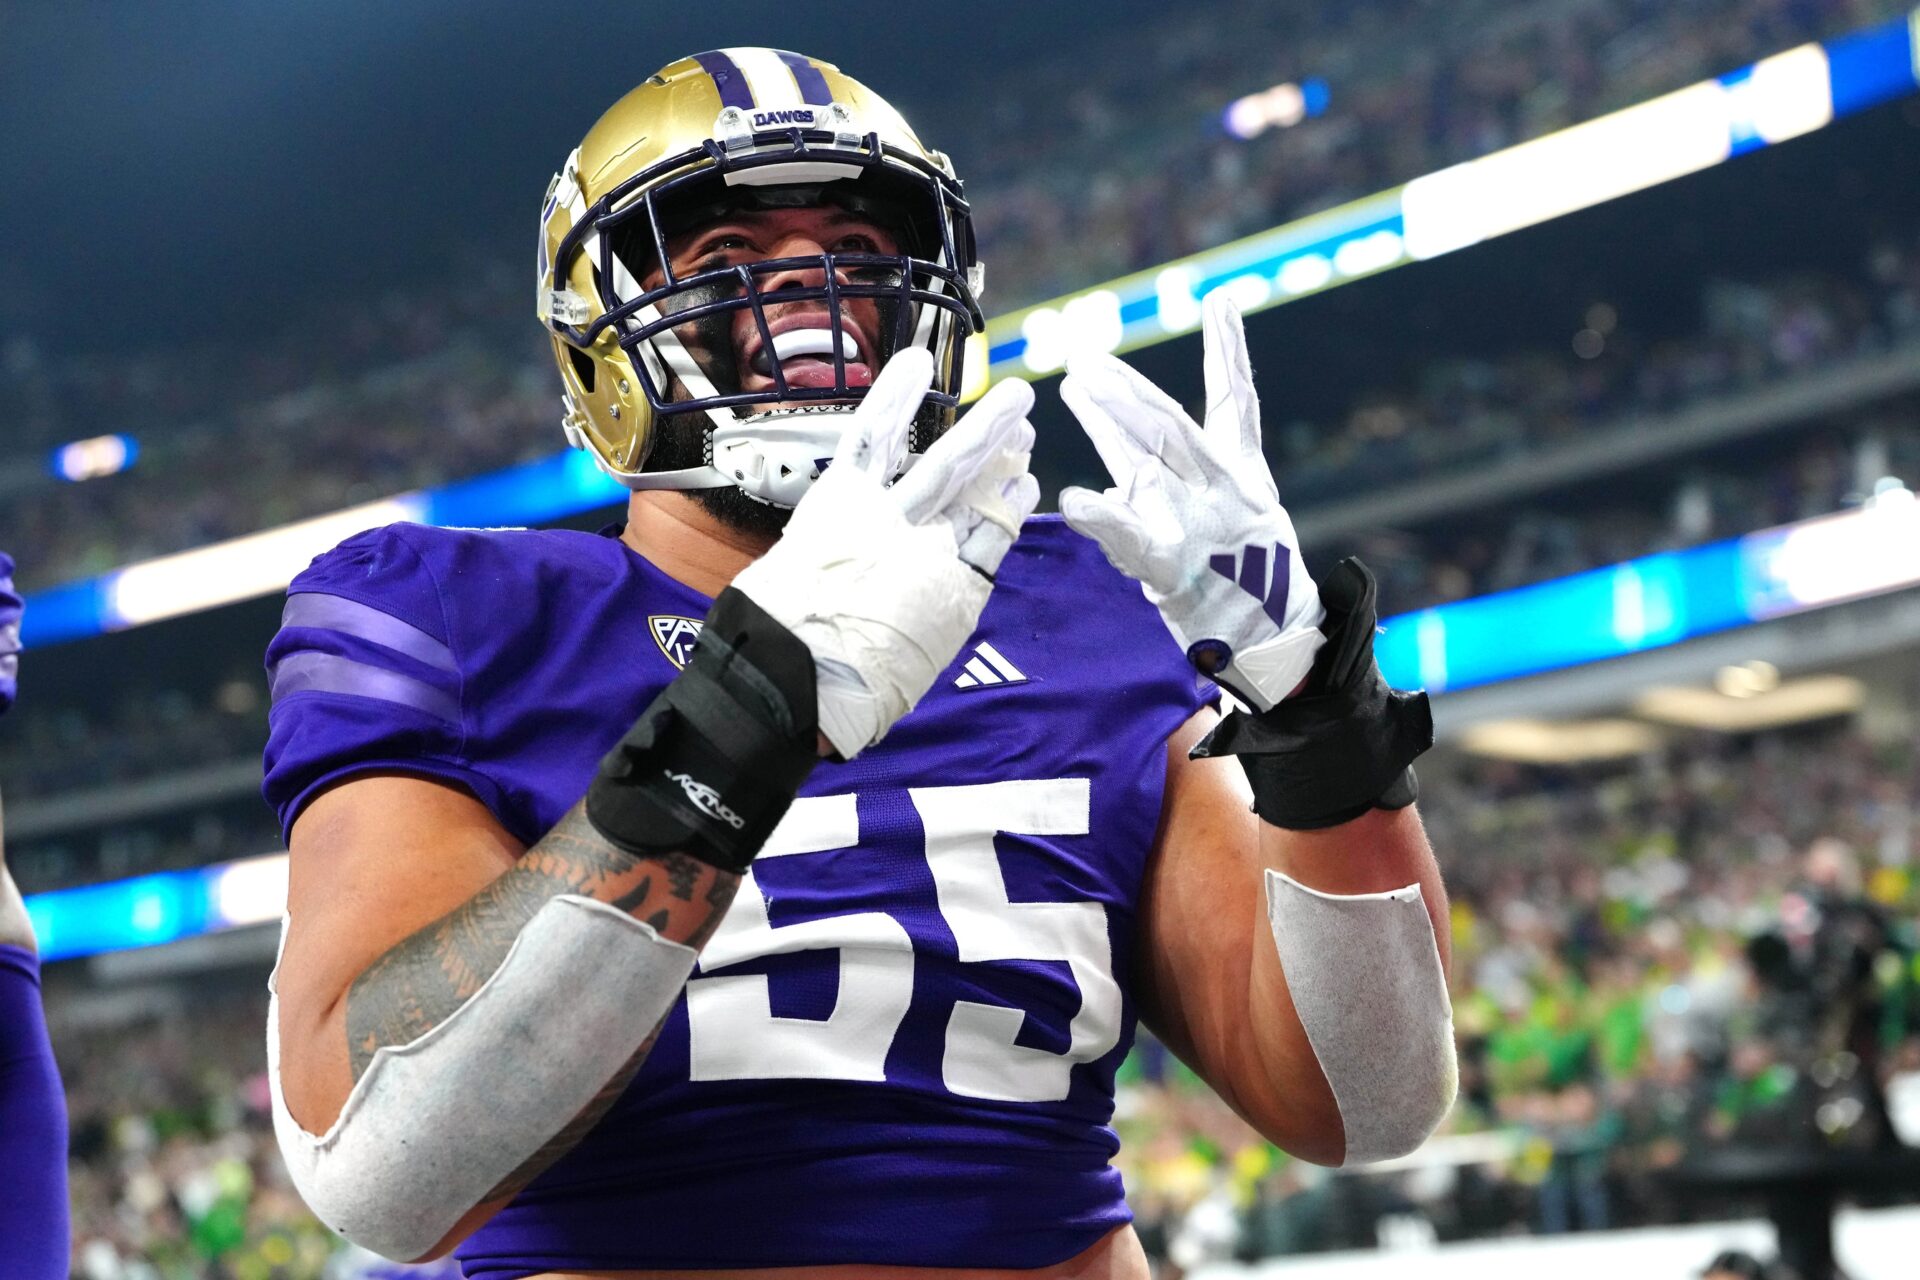 Washington Huskies offensive lineman Troy Fautanu (55) celebrates after the Huskies scored against the Oregon Ducks during the first quarter at Allegiant Stadium.